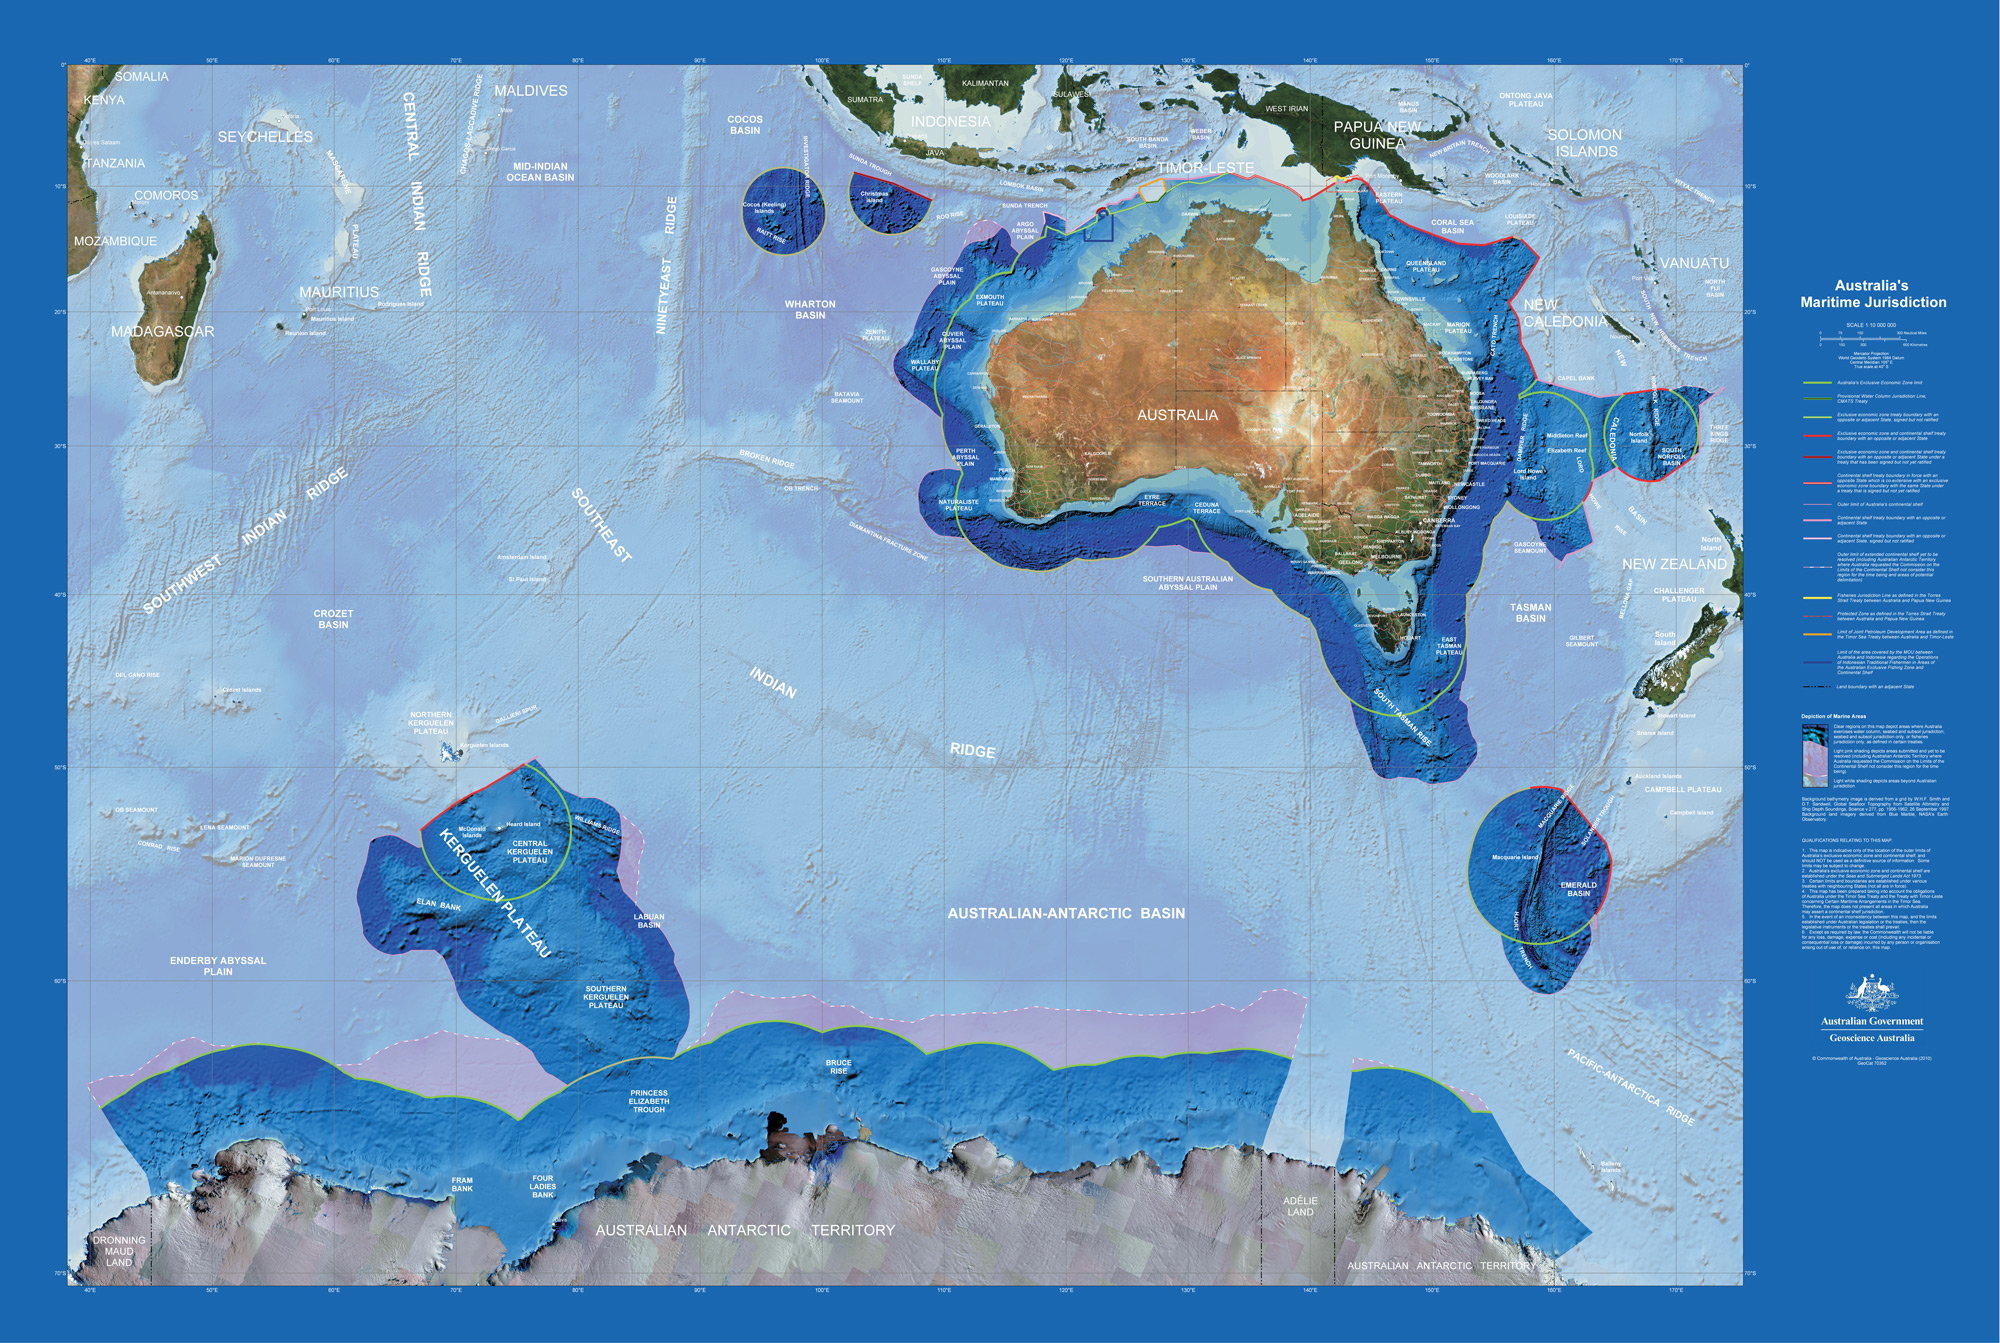 More detailed thematic map of Australia